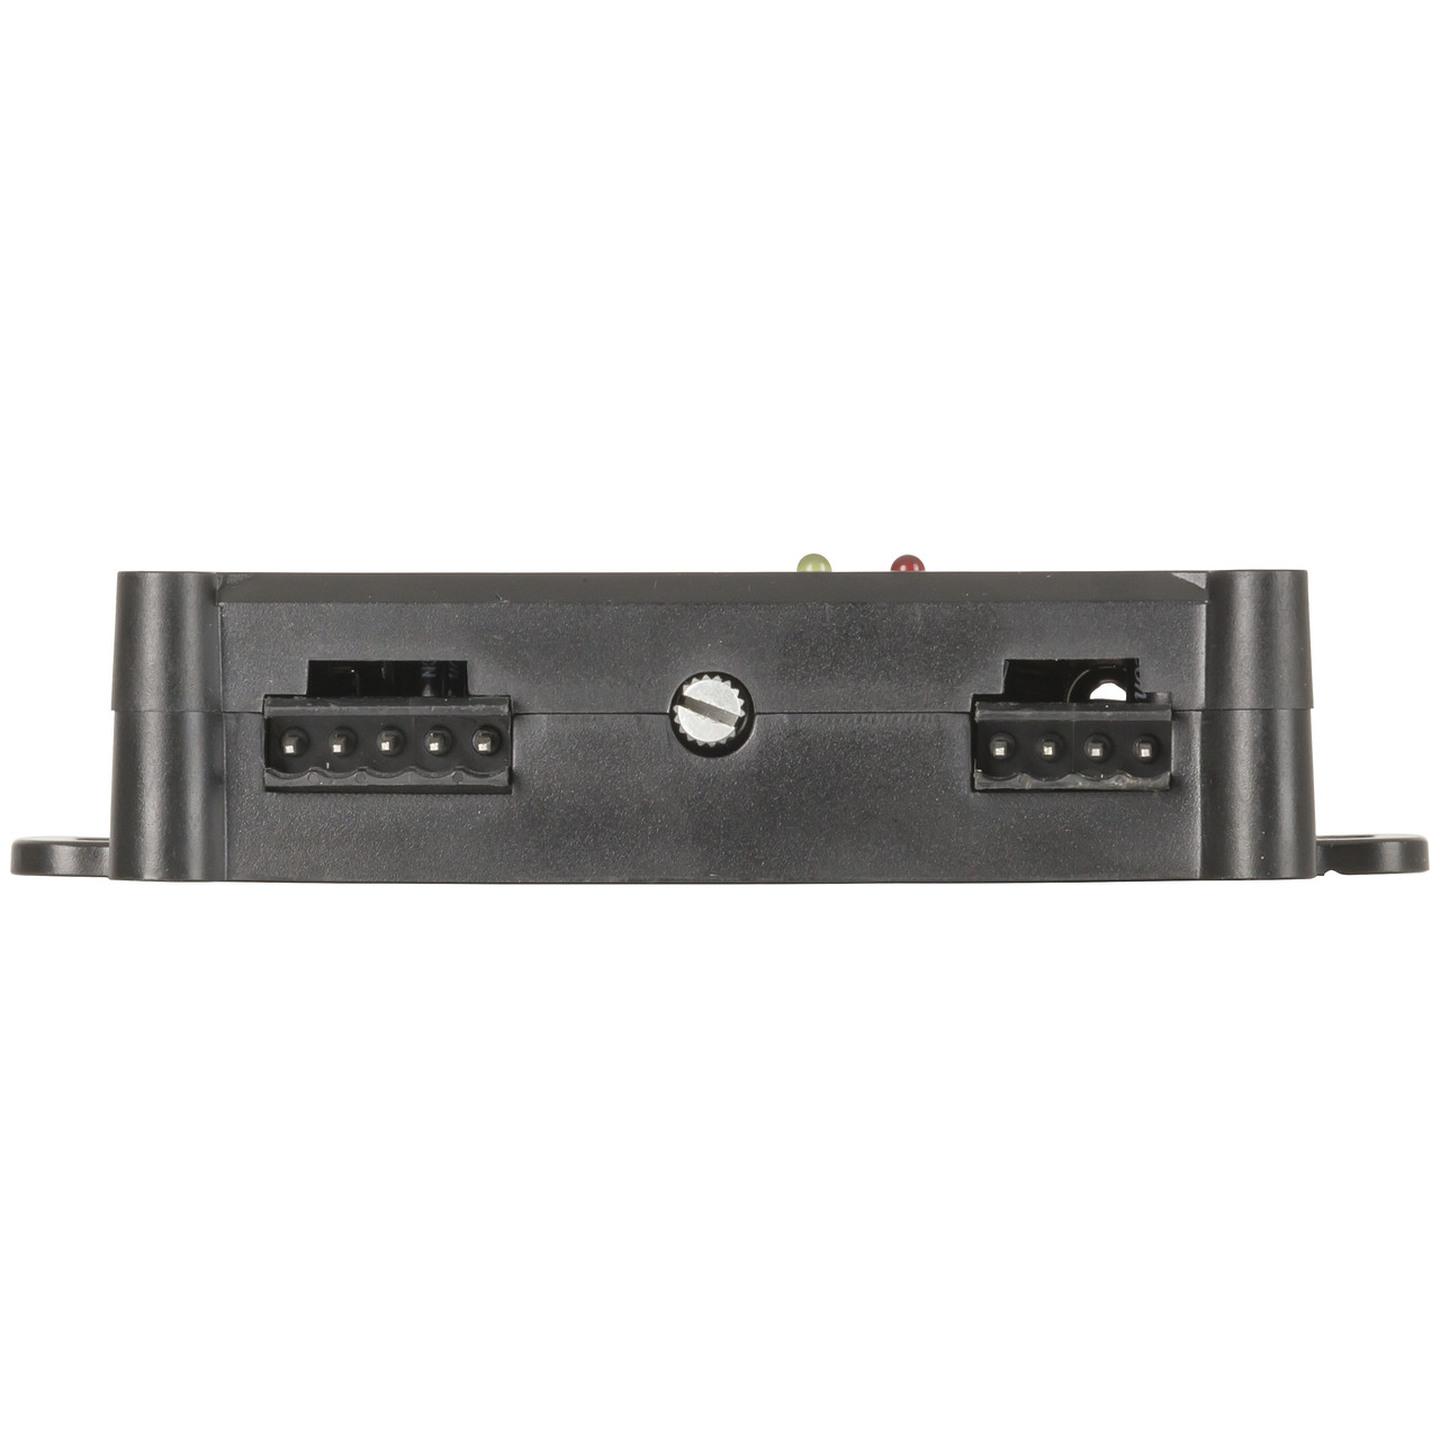 2 Channel High Quality Line Level Converter